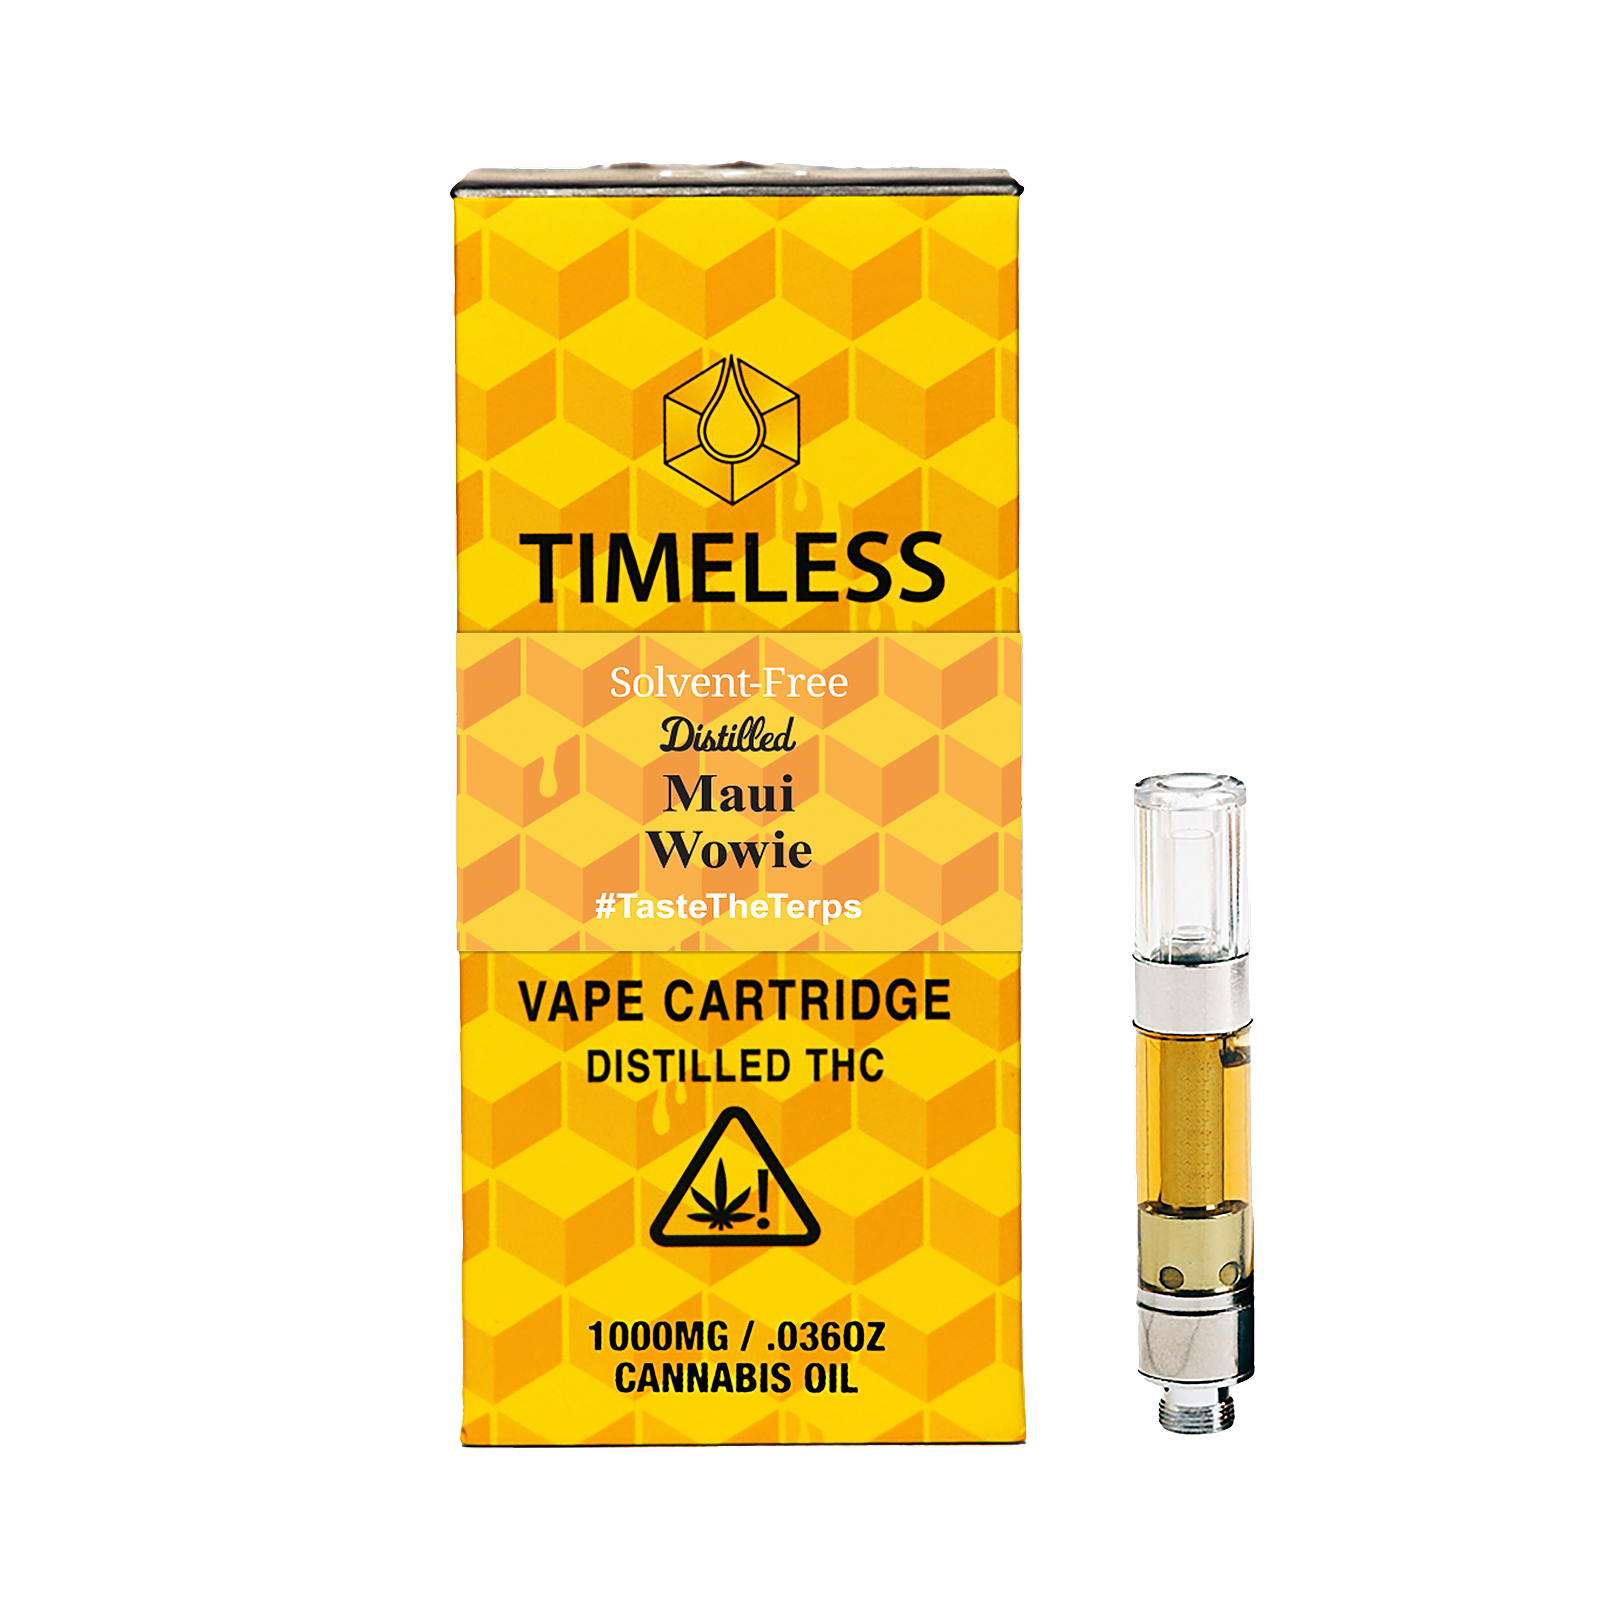 who owns timeless vapes